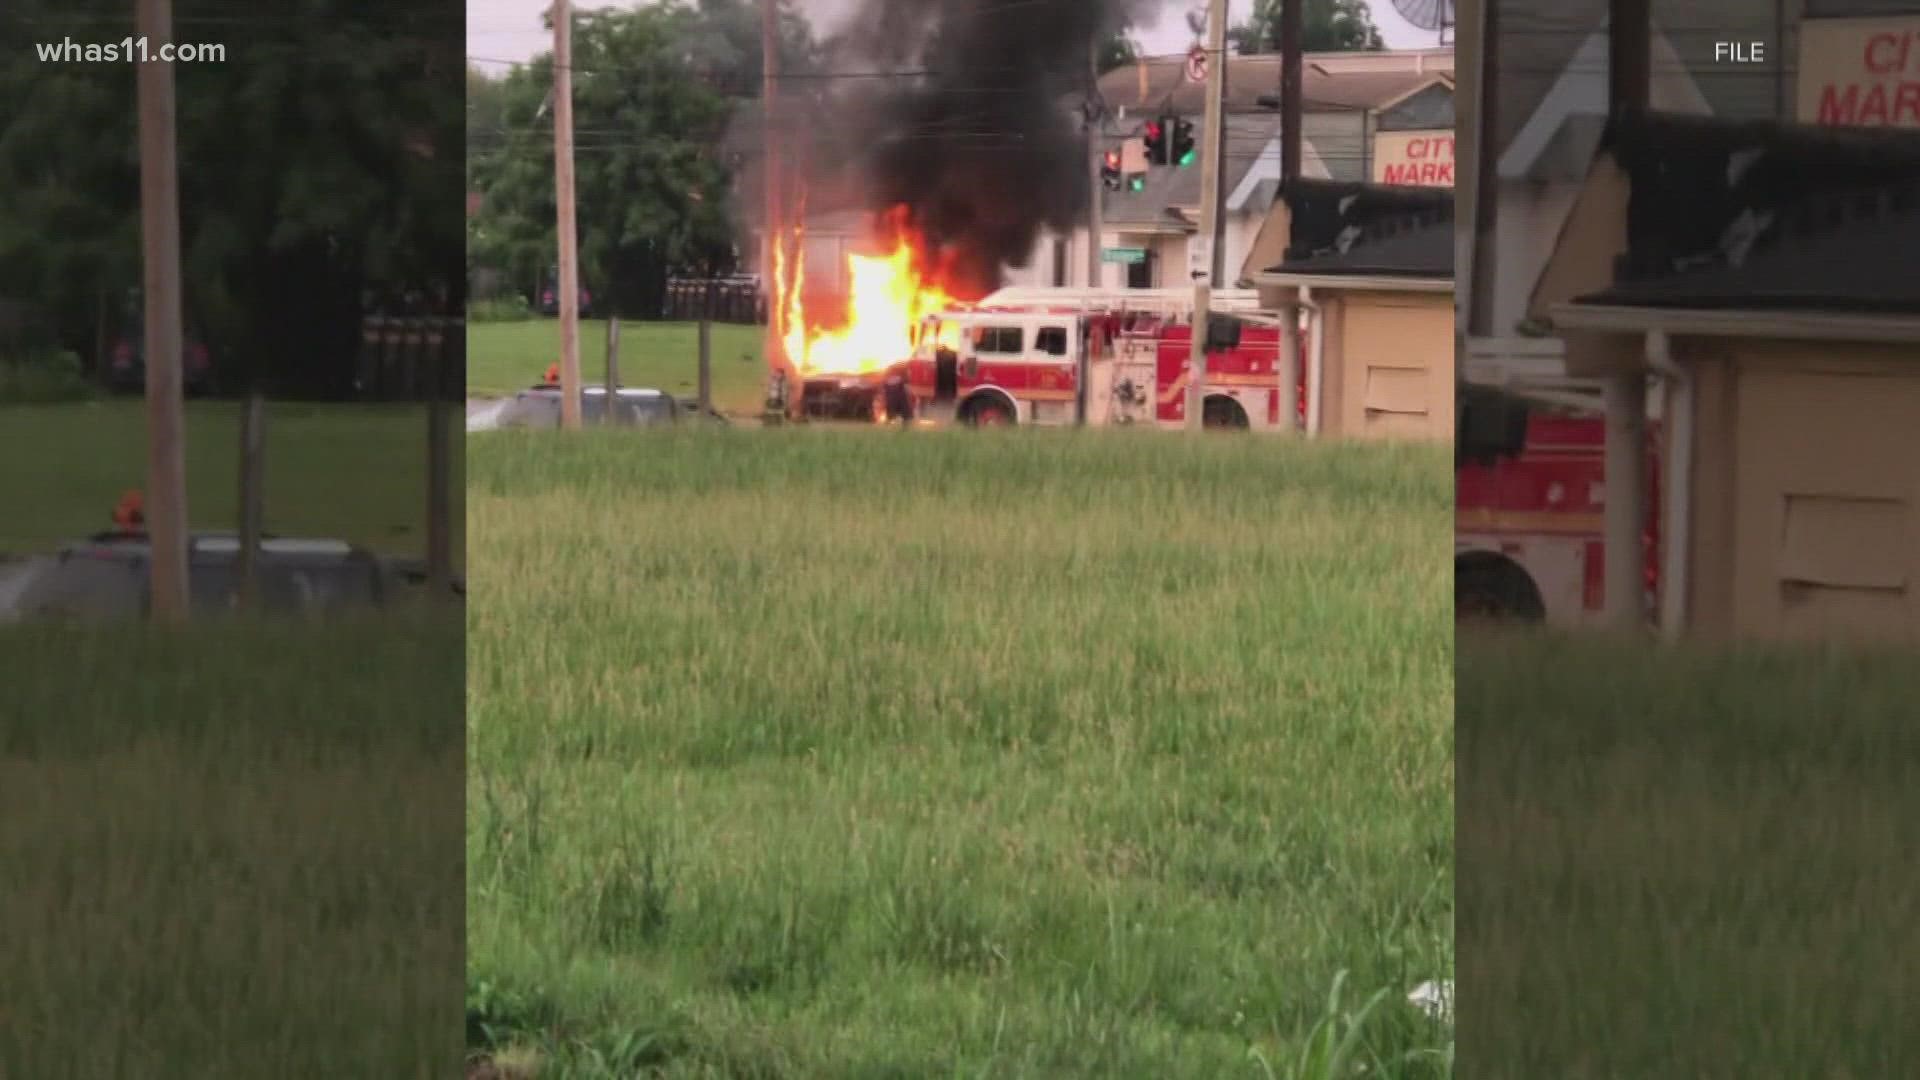 The family of a man killed in a fiery crash in the California neighborhood is suing LMPD after they say an officer ignored department policy and put lives at risk.